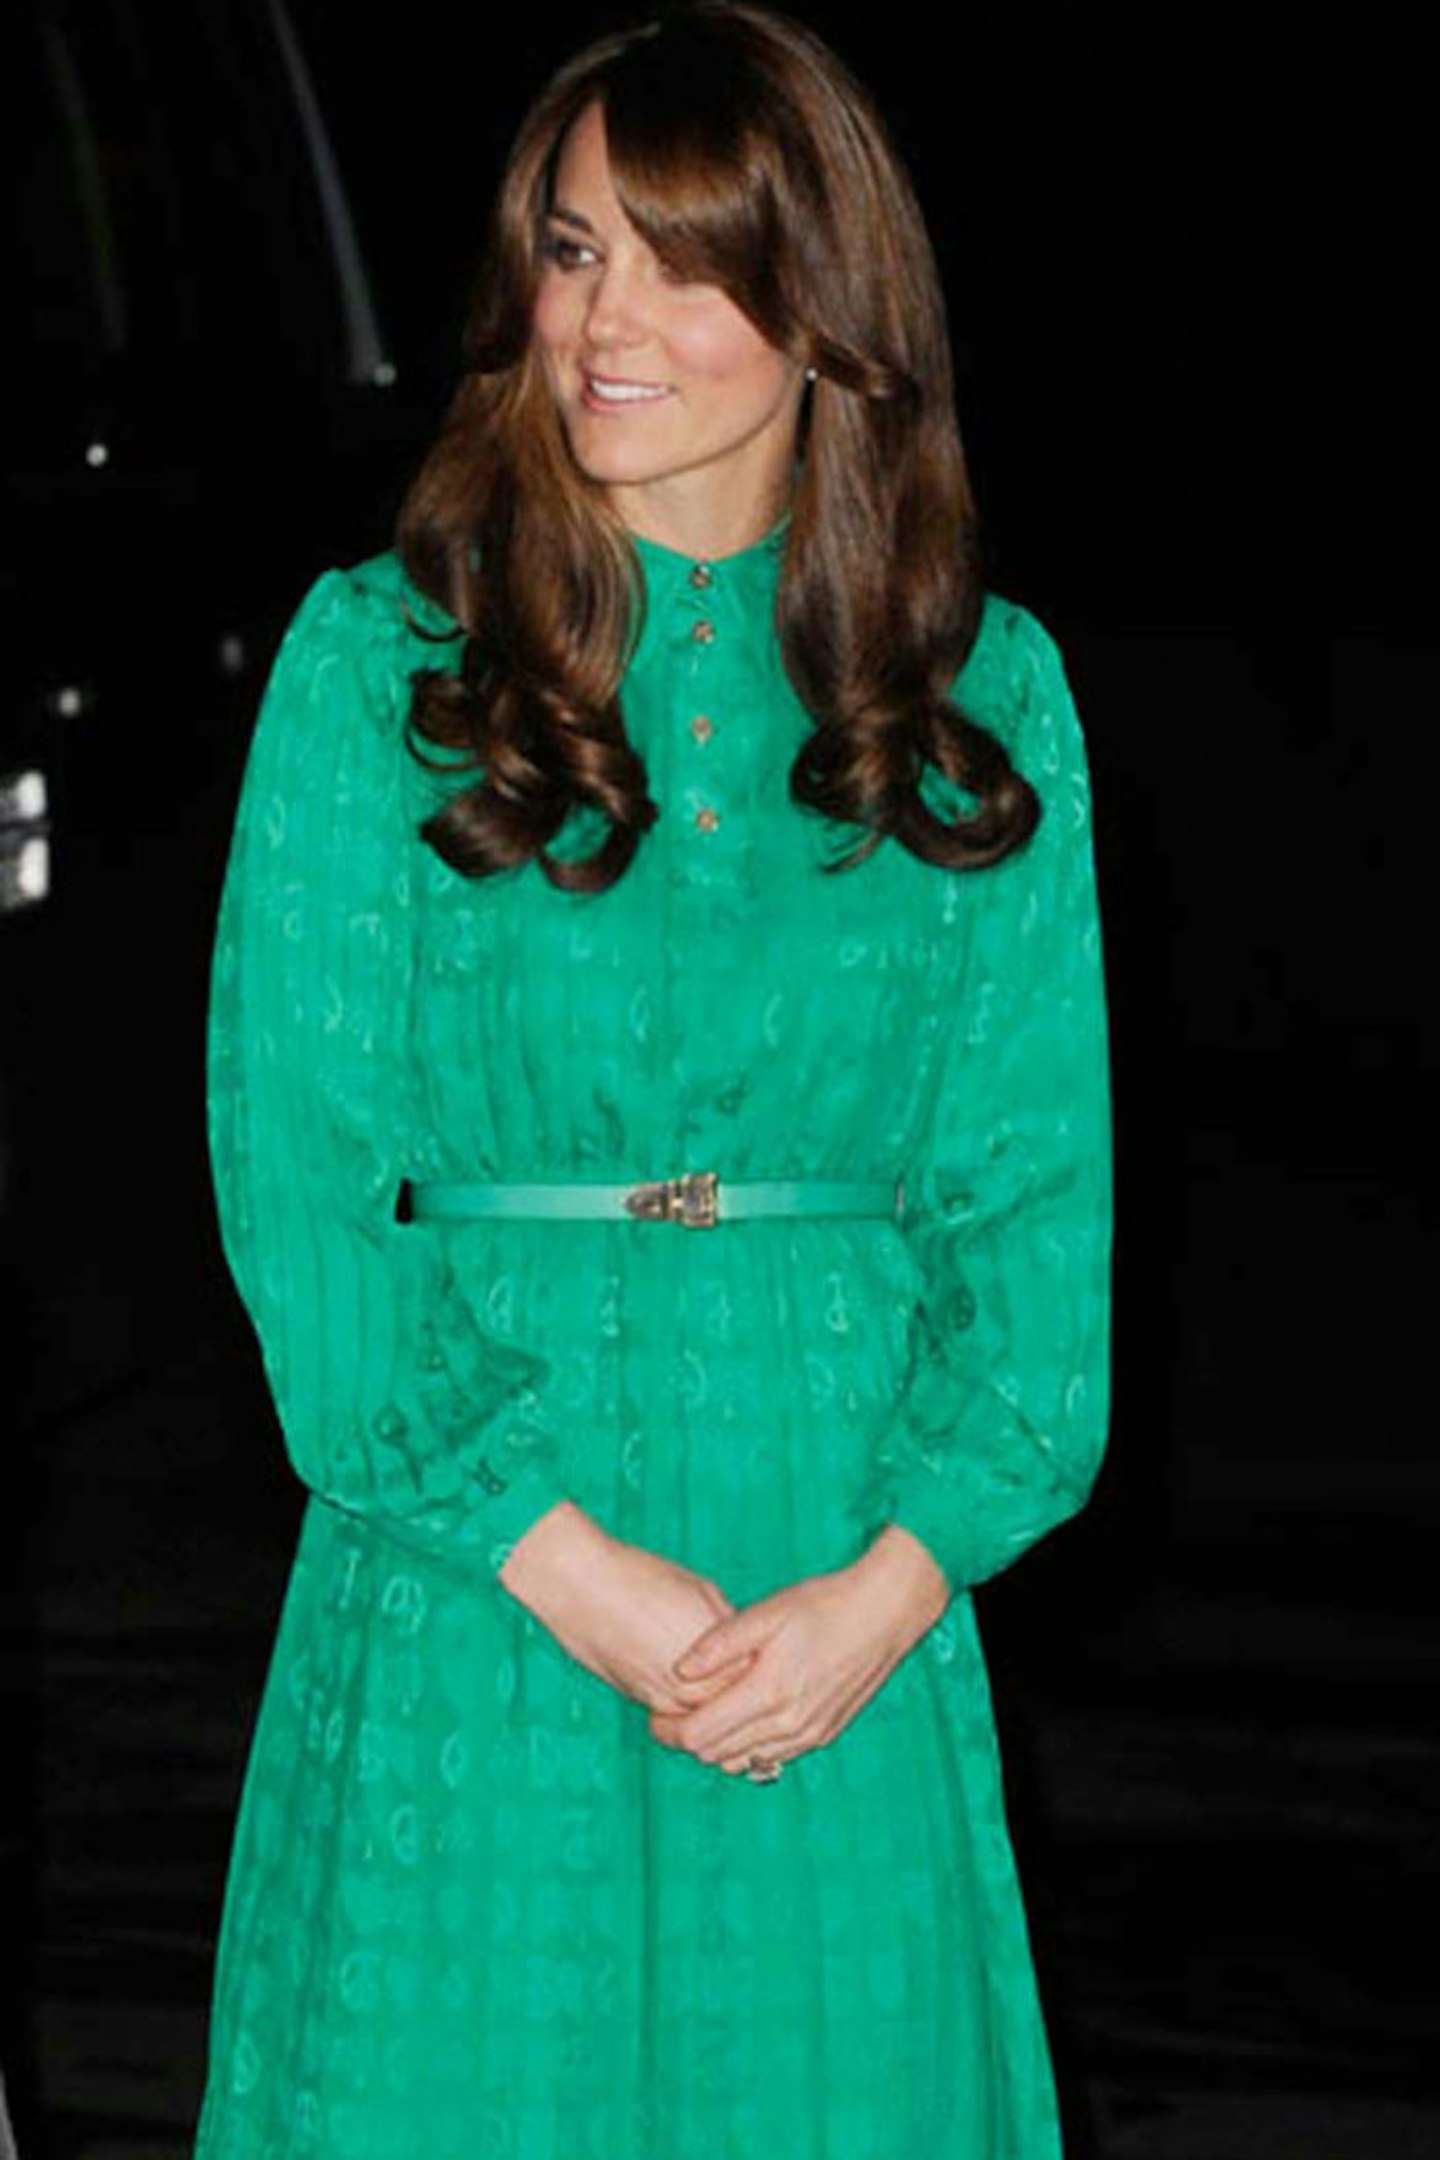 Kate Middleton wears Mulberry green dress, The Natural History Museum, 27 November 2012